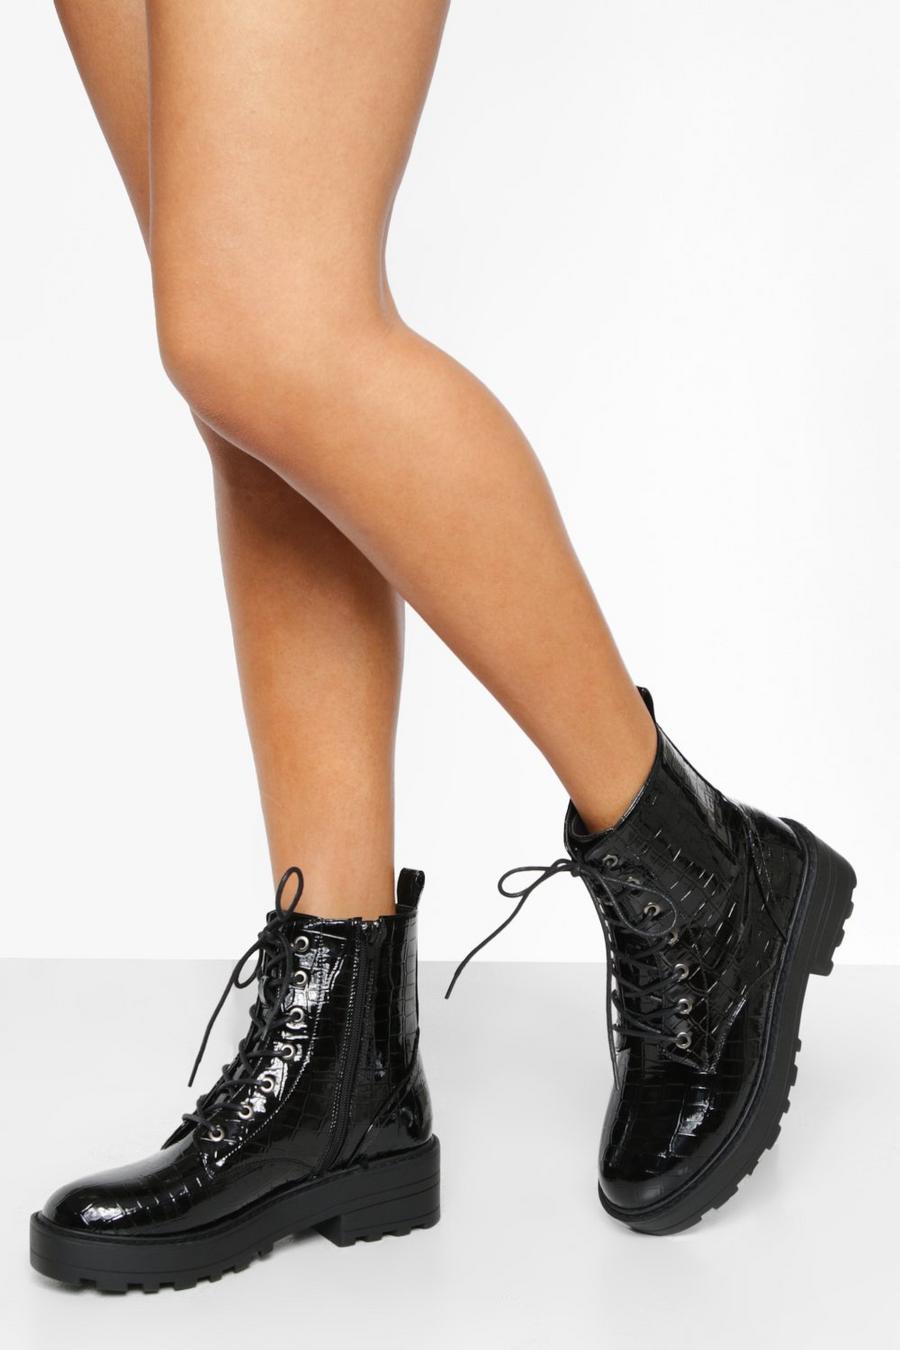 Black Patent Croc Chunky Lace Up Combat Boots image number 1